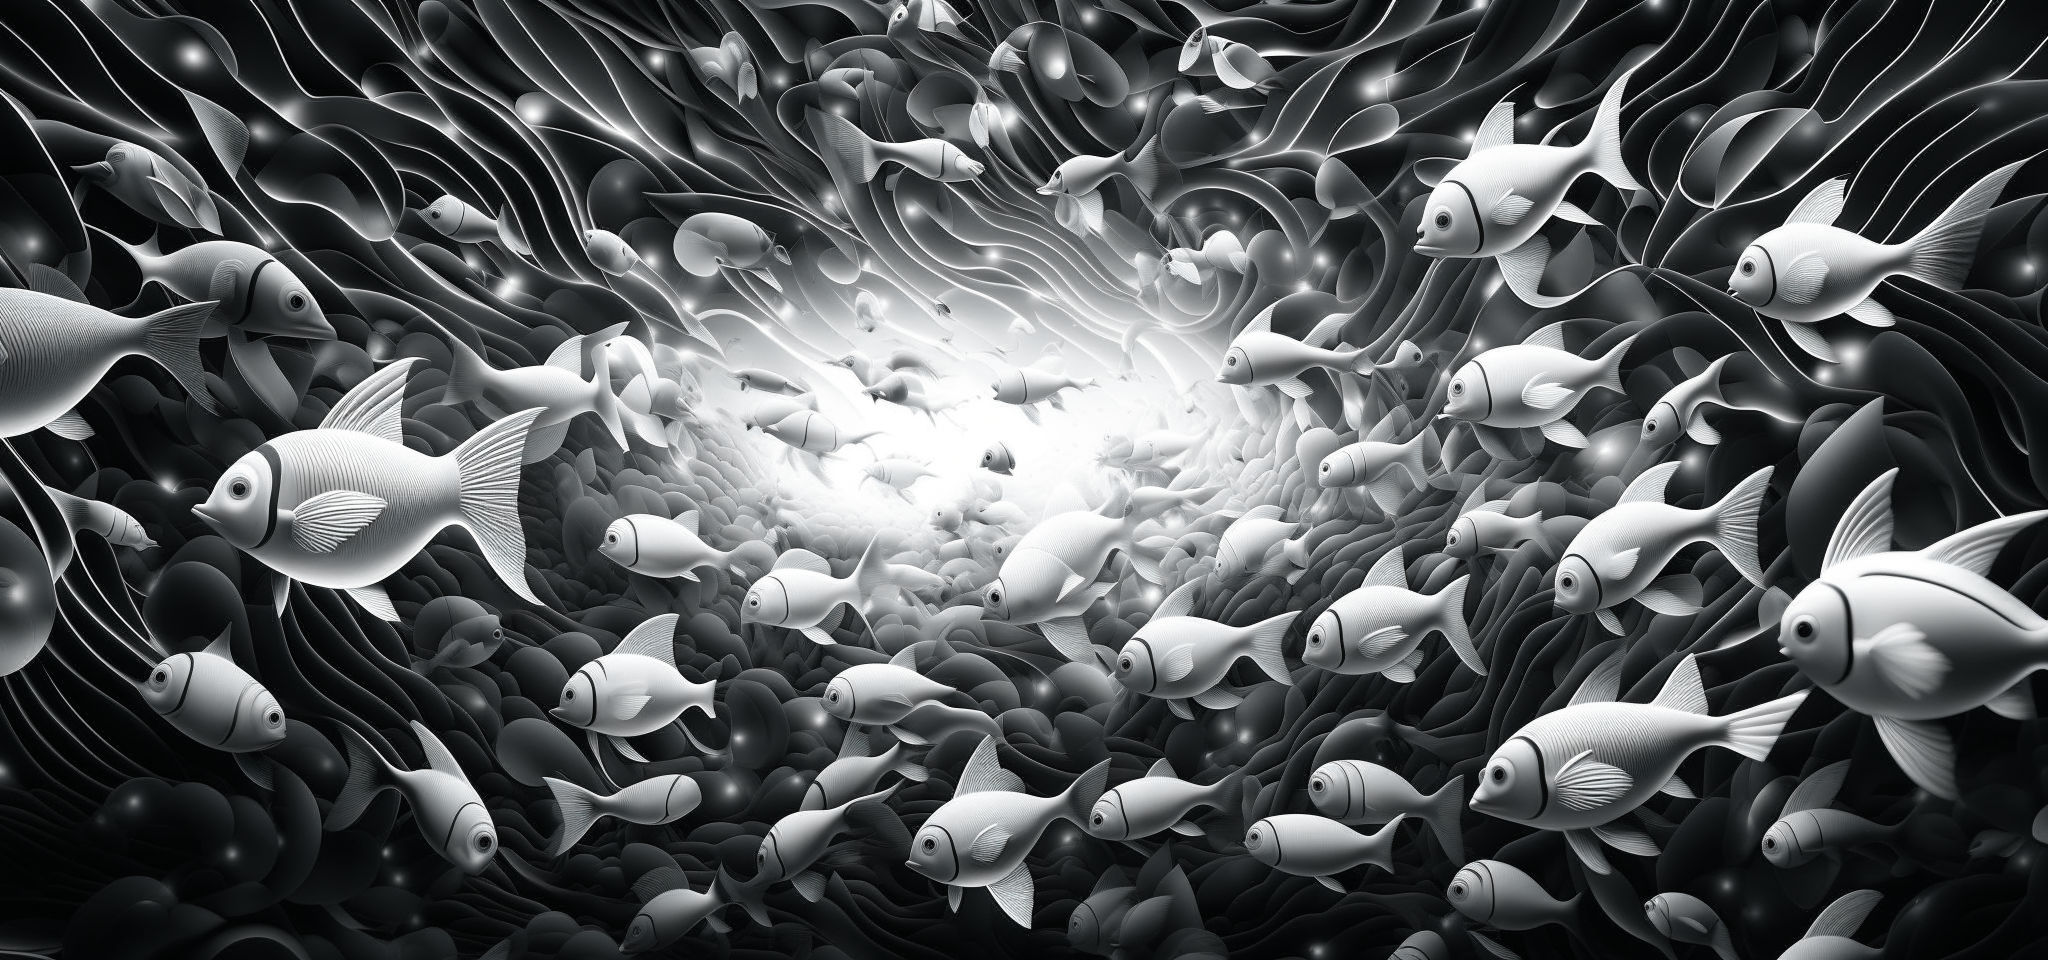 post background, dark theme, fractals, abstract, space, very light white and gray colors, fishes on the background